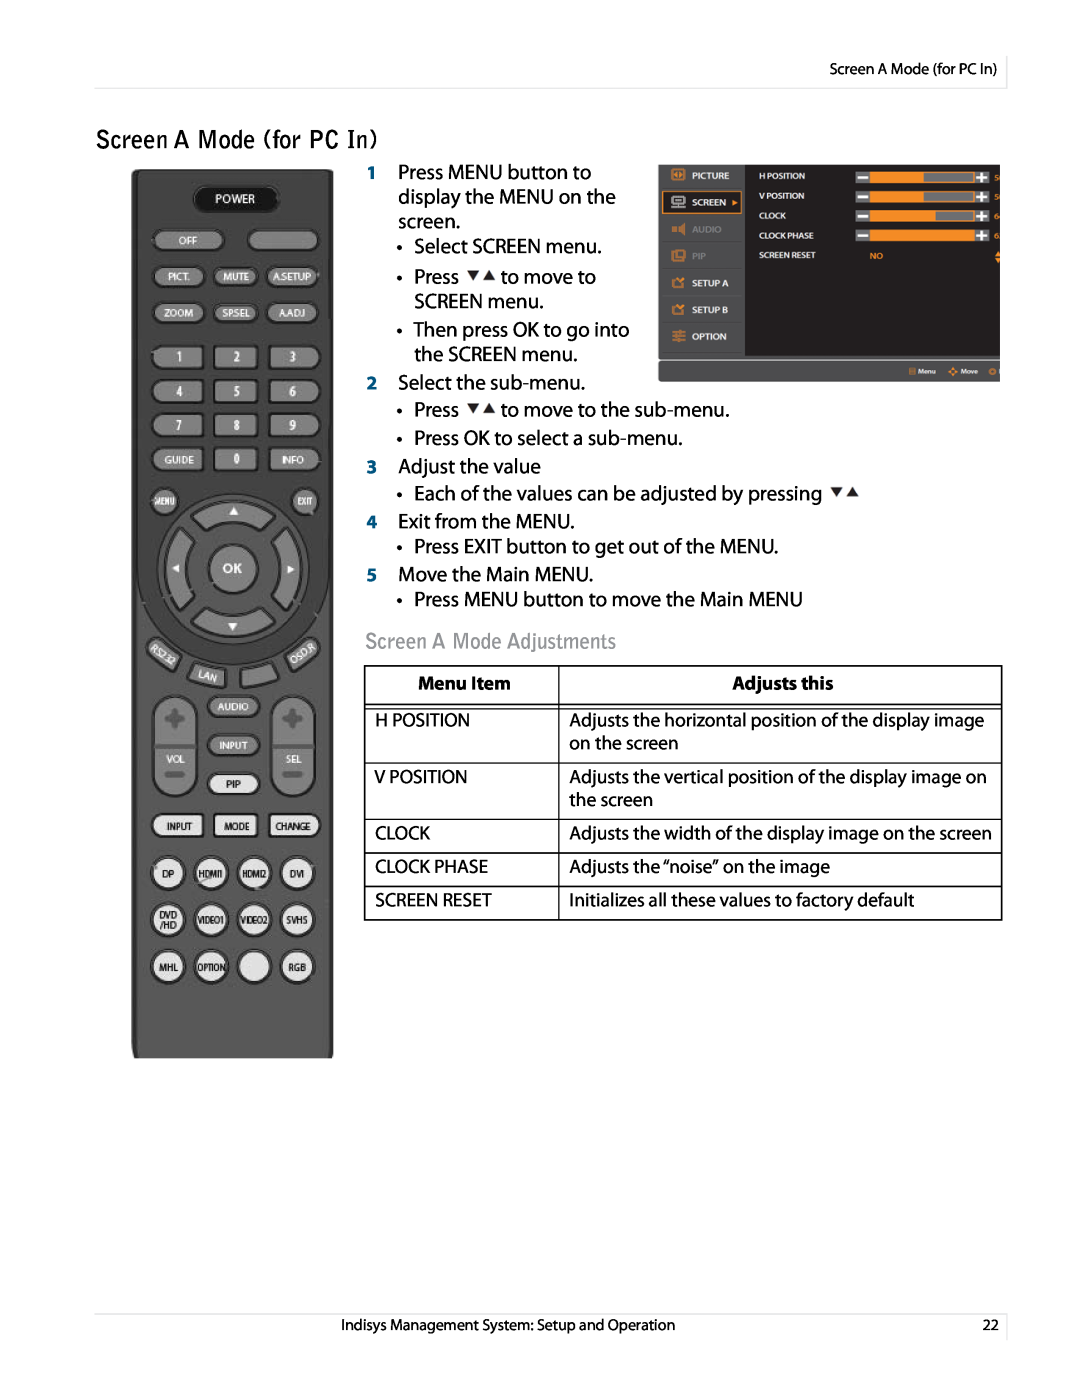 Planar PS5580 manual Screen A Mode for PC In, Screen A Mode Adjustments 